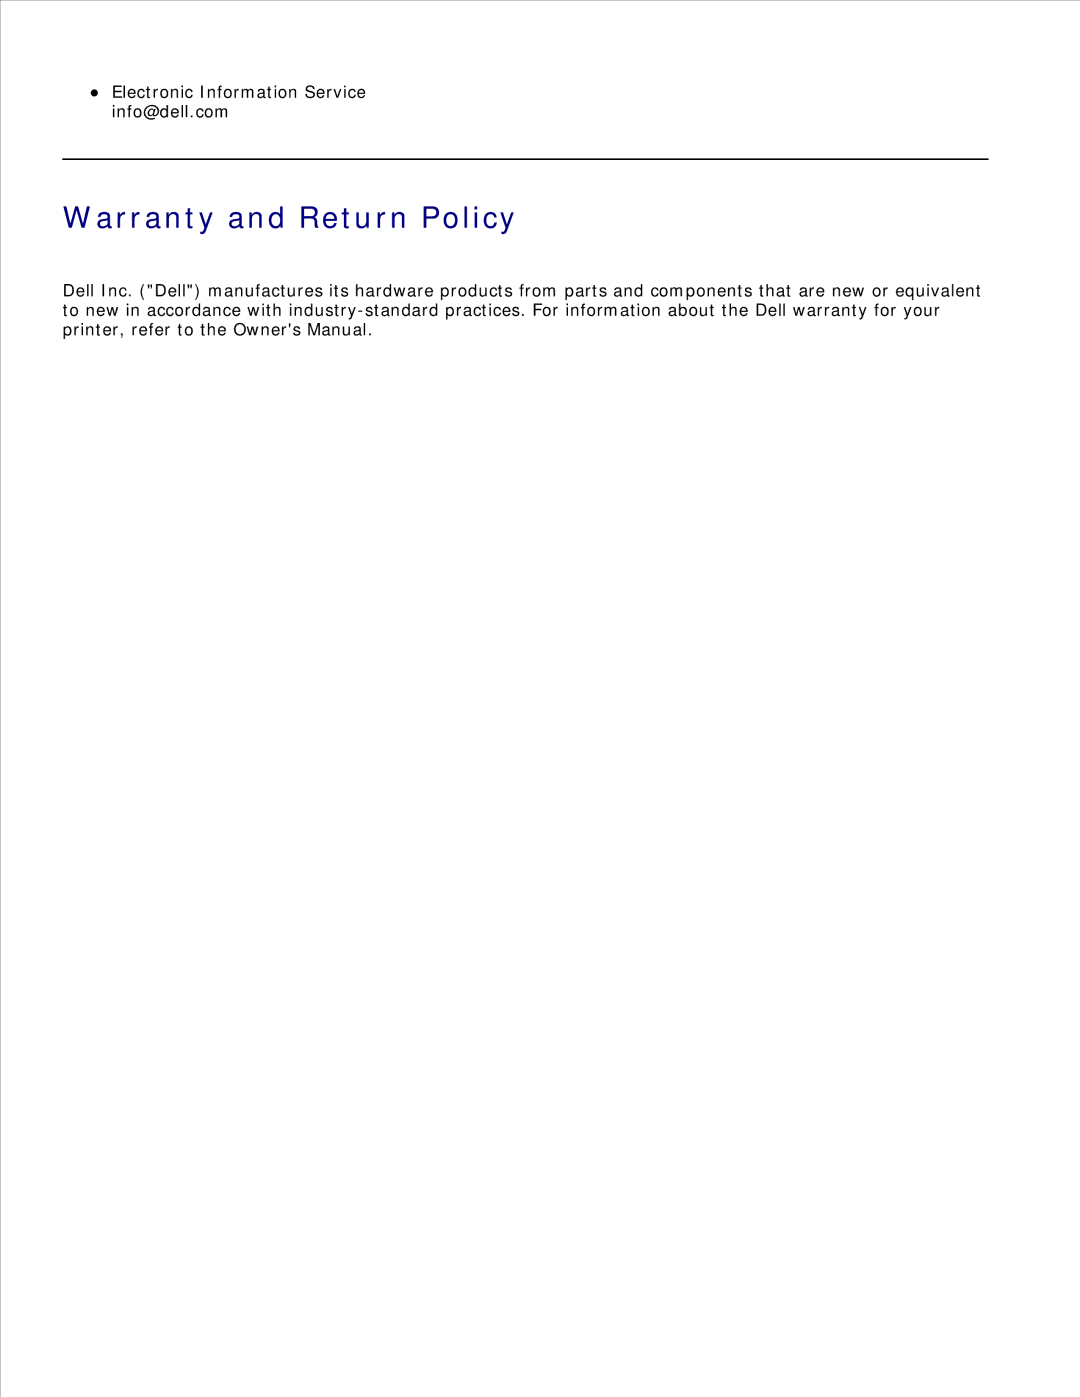 Dell 942 manual Warranty and Return Policy 